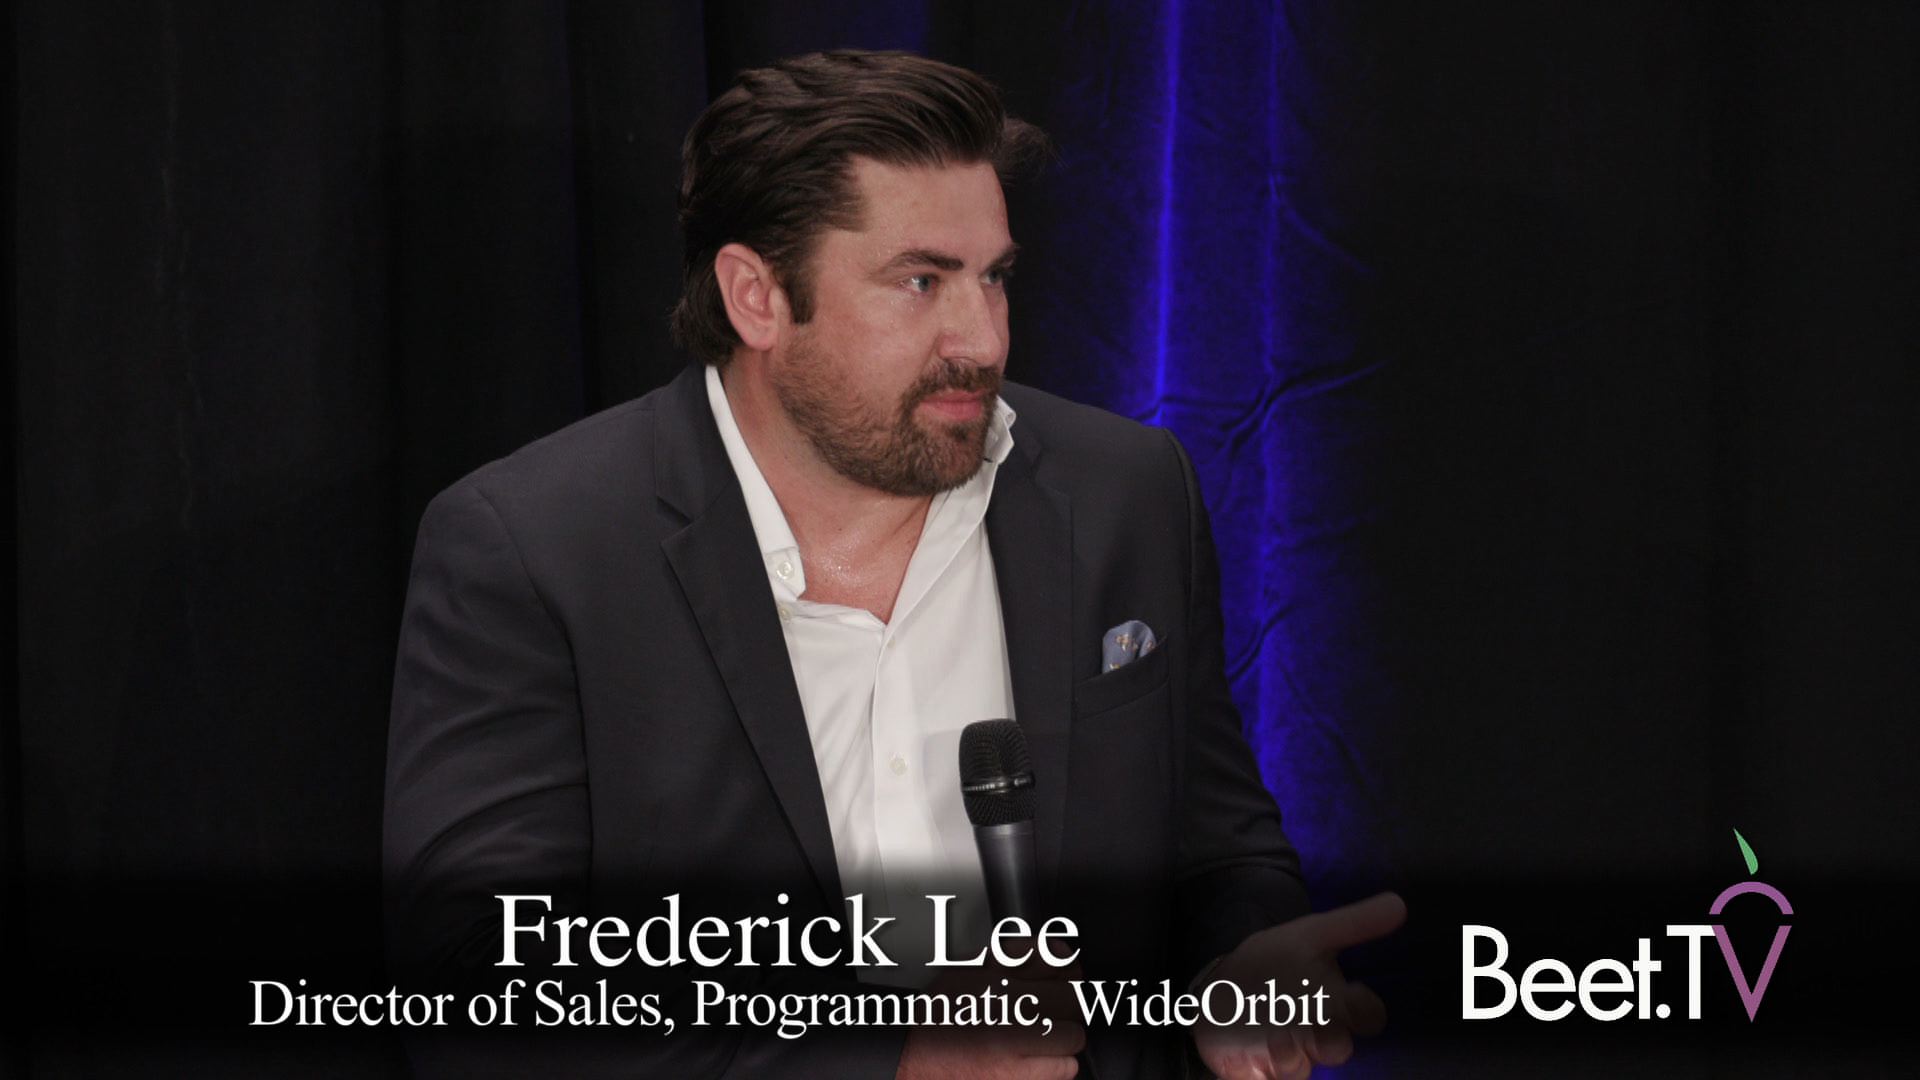 On TV, D2Cs Can Scale With Balance: NBCU’s Norris & WideOrbit’s Lee